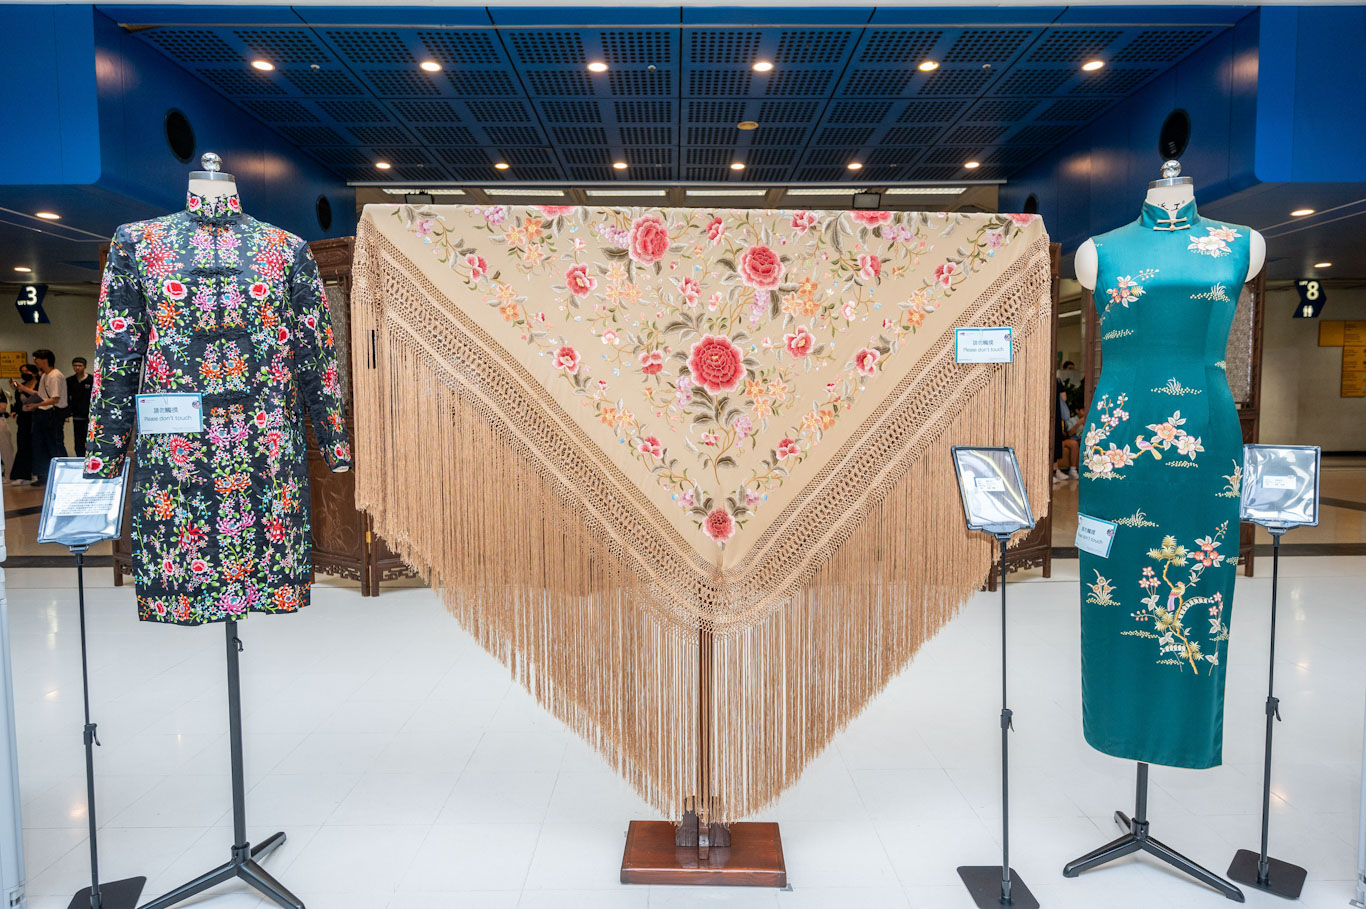 Guang Embroidery exhibition: the Manila Shawl